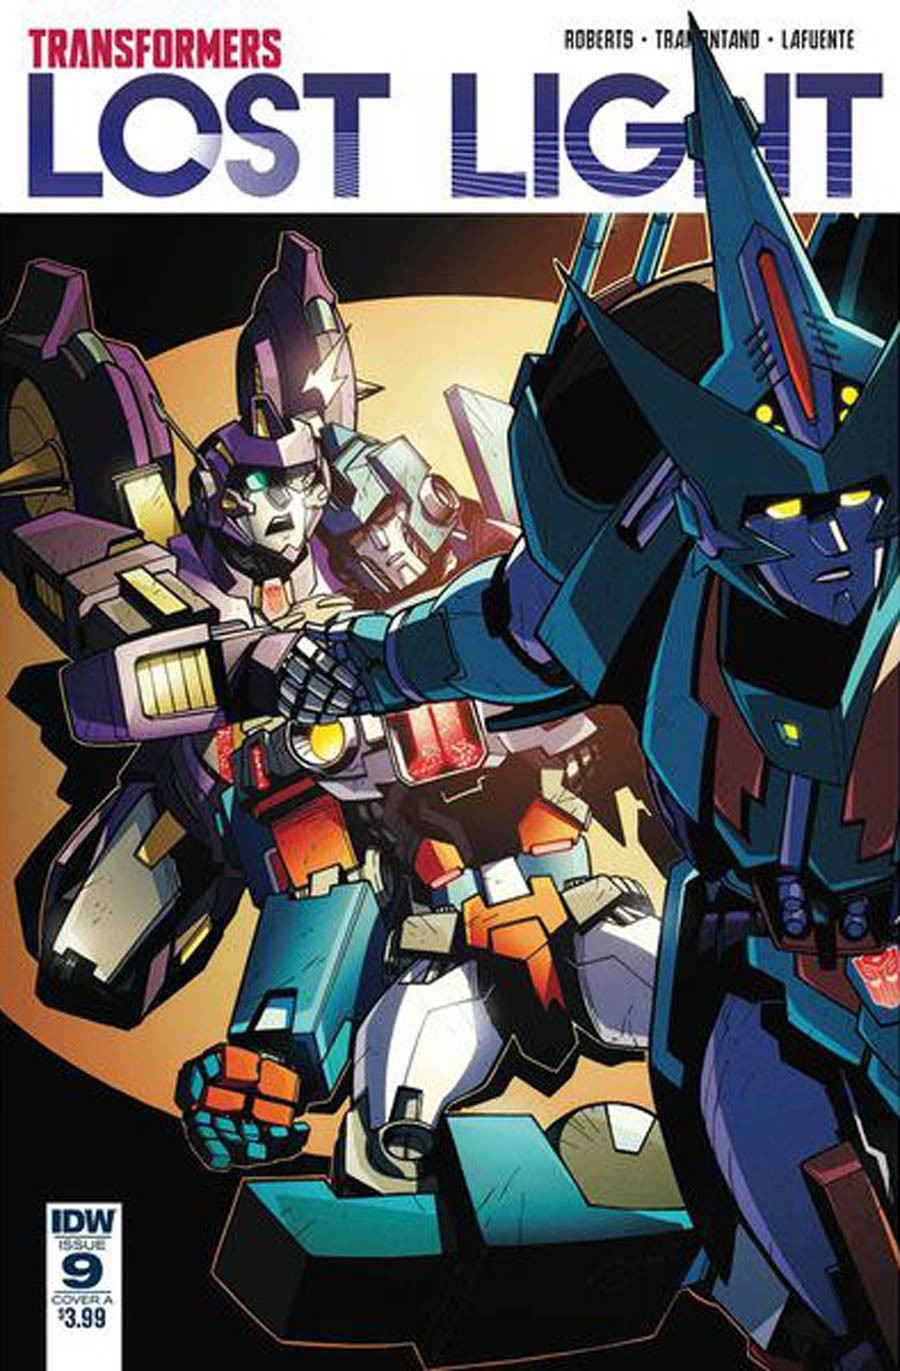 Transformers News: Variant Covers For IDW Transformers: Lost Light #9